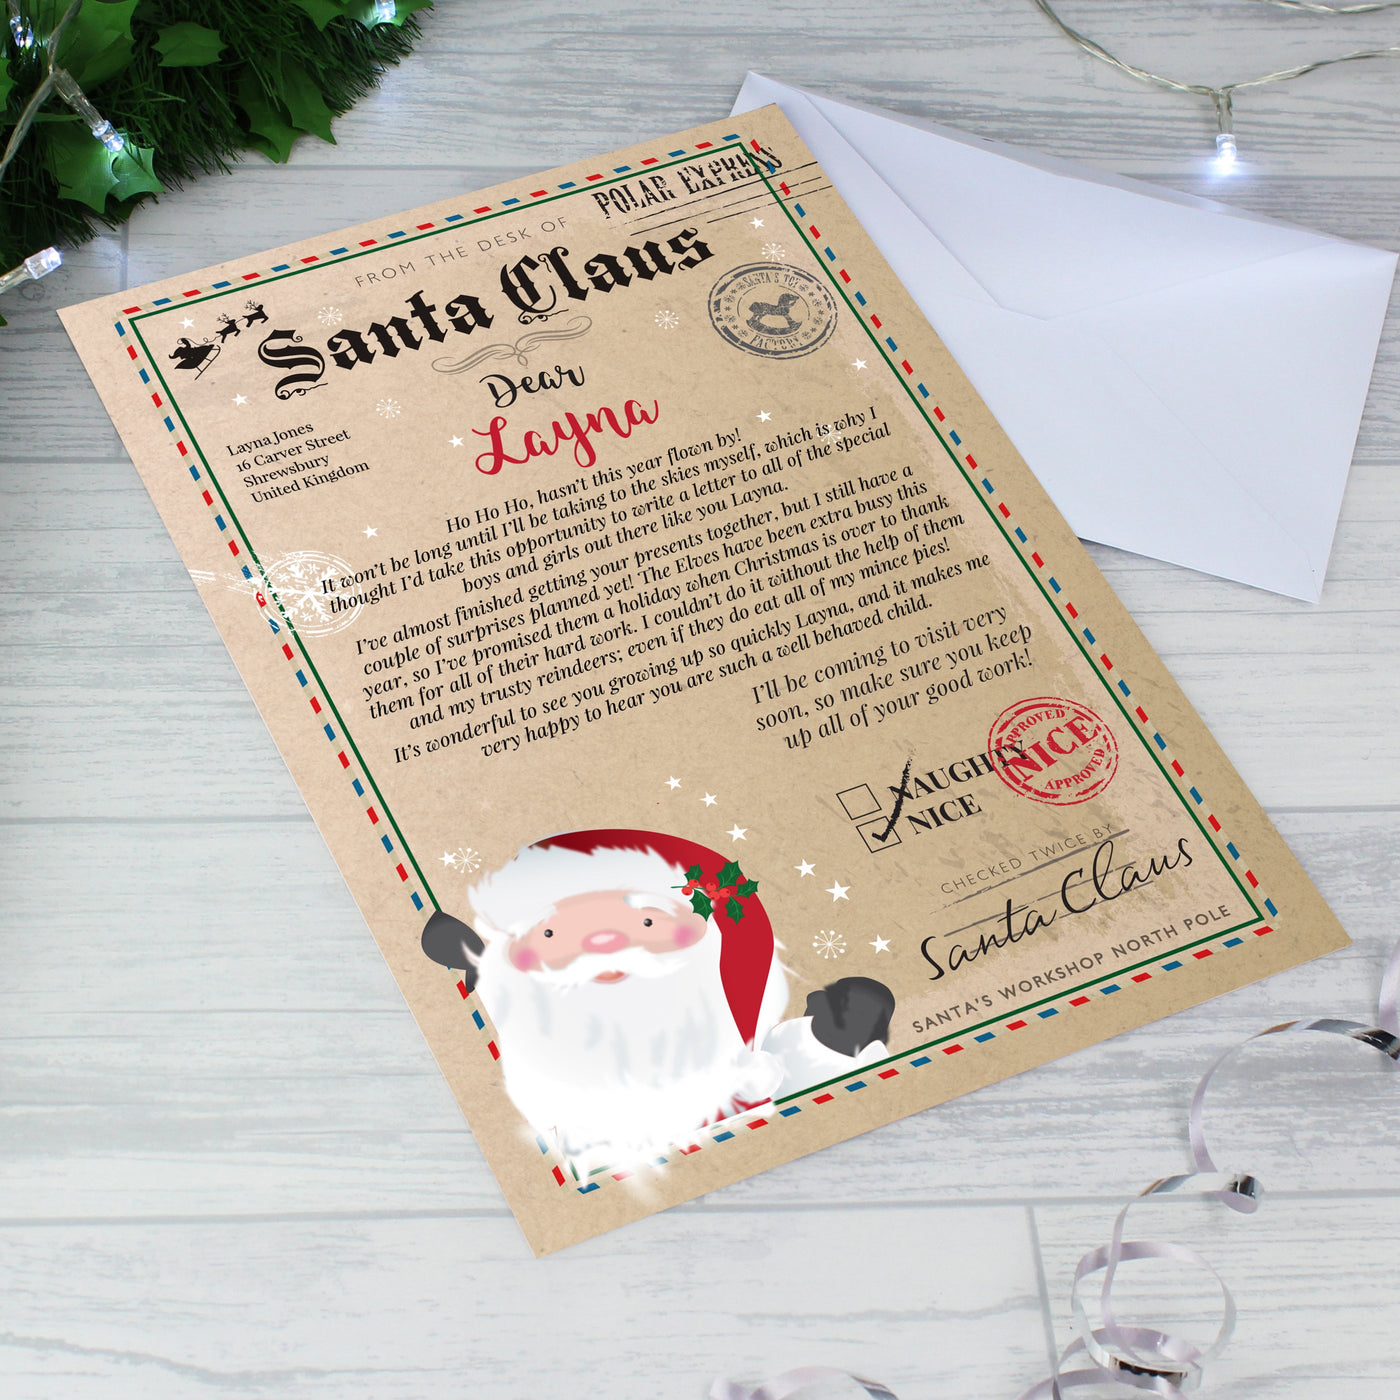 Personalised Santa Claus Letter Christmas Letter For Children - Shop Personalised Gifts